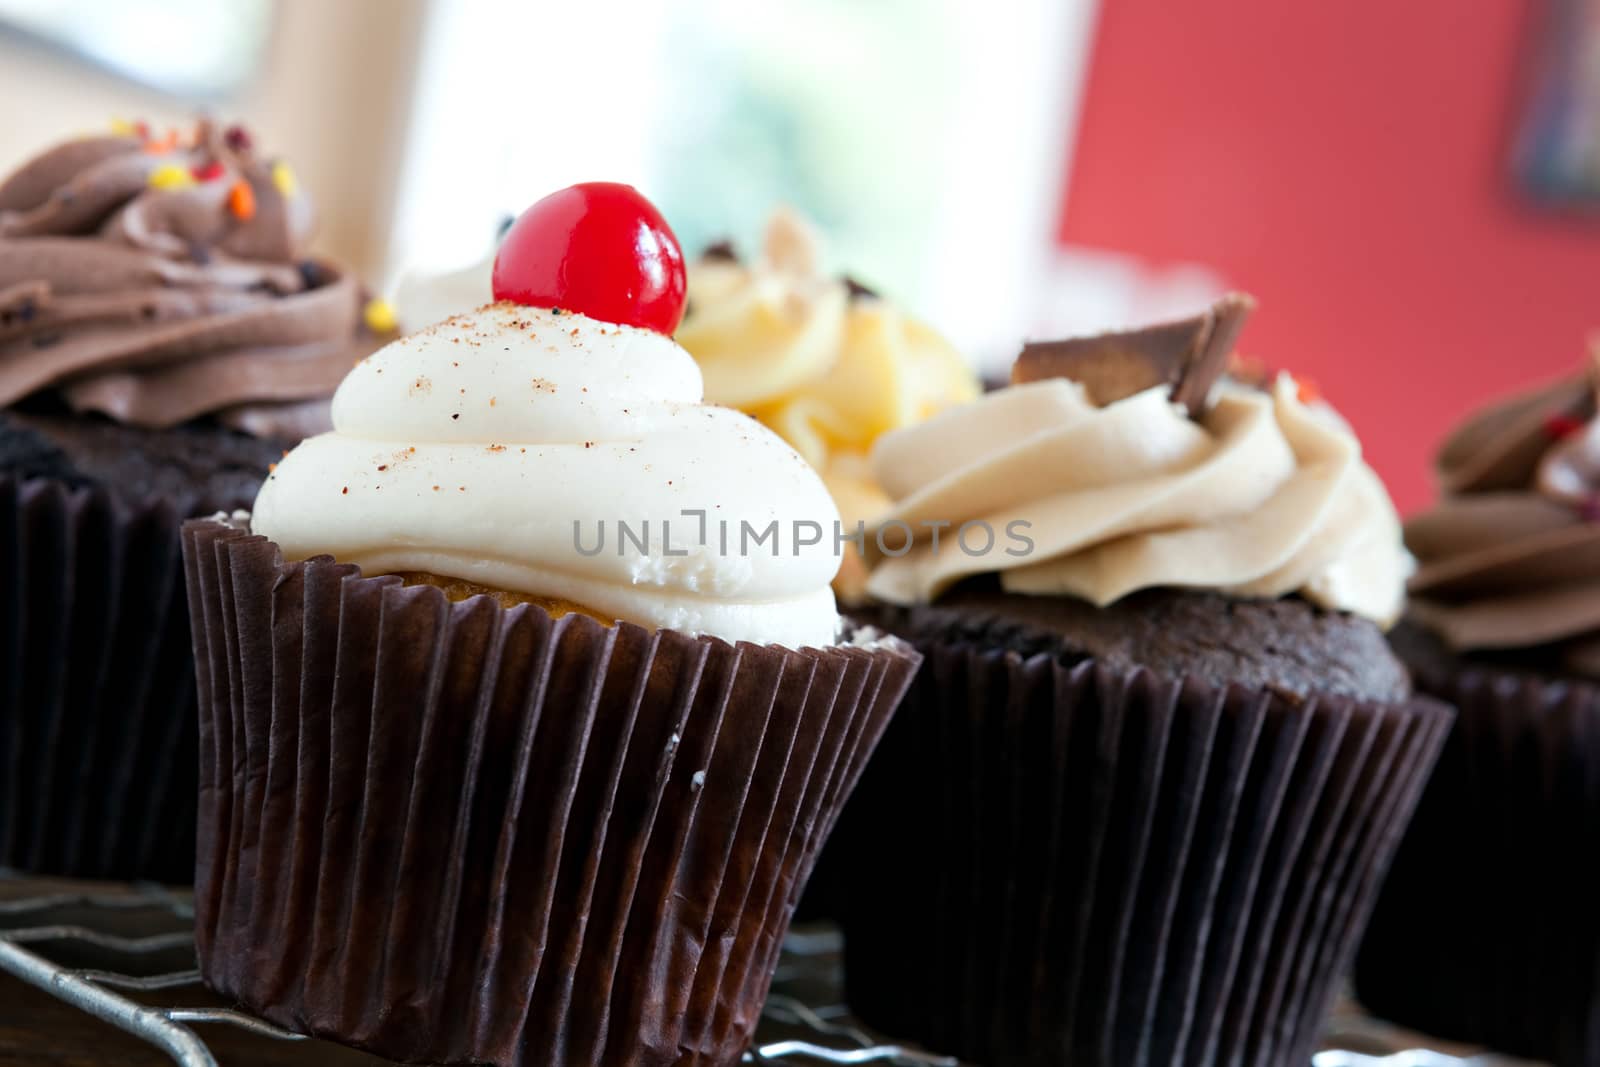 Decadent gourmet cupcakes frosted with a variety of flavors. Shallow depth of field.